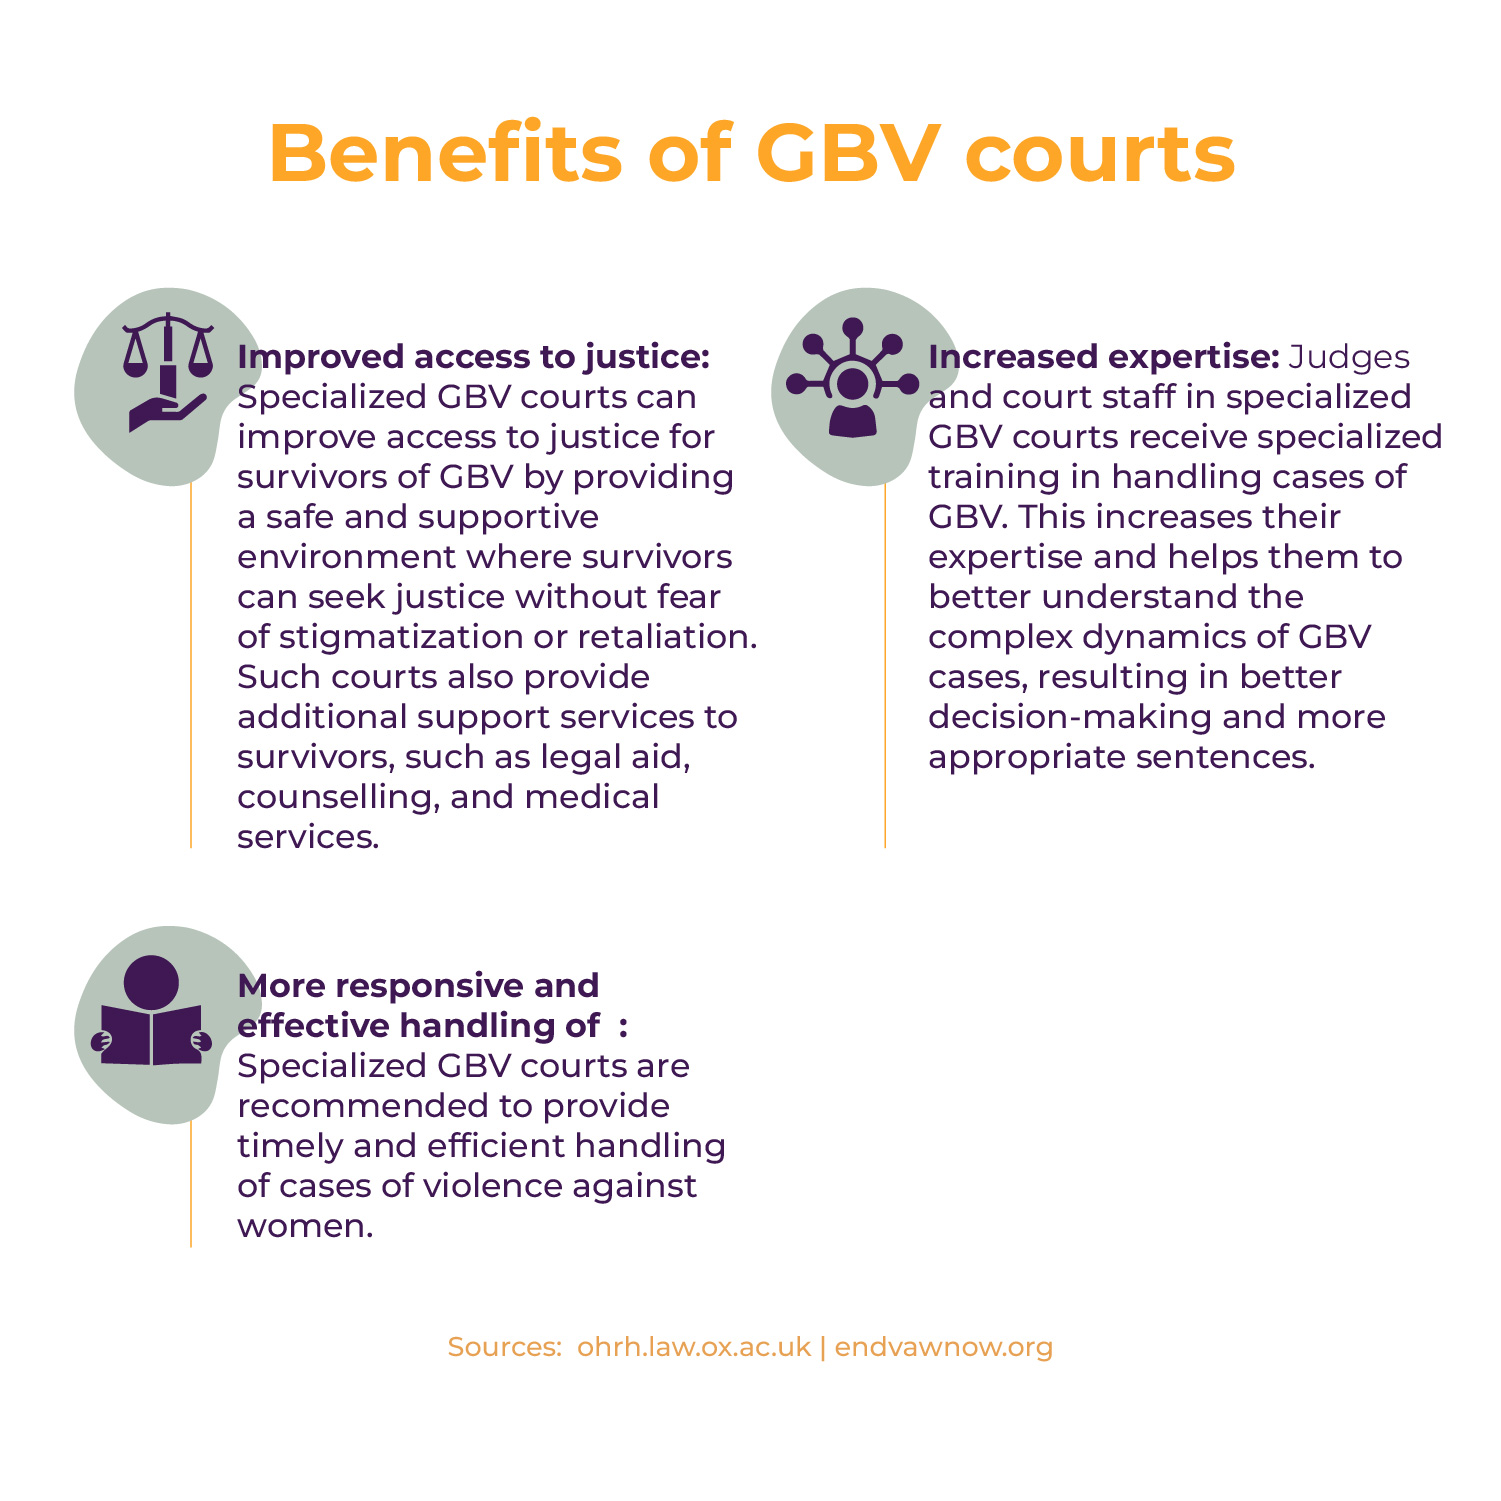 Benefits of GBV courts